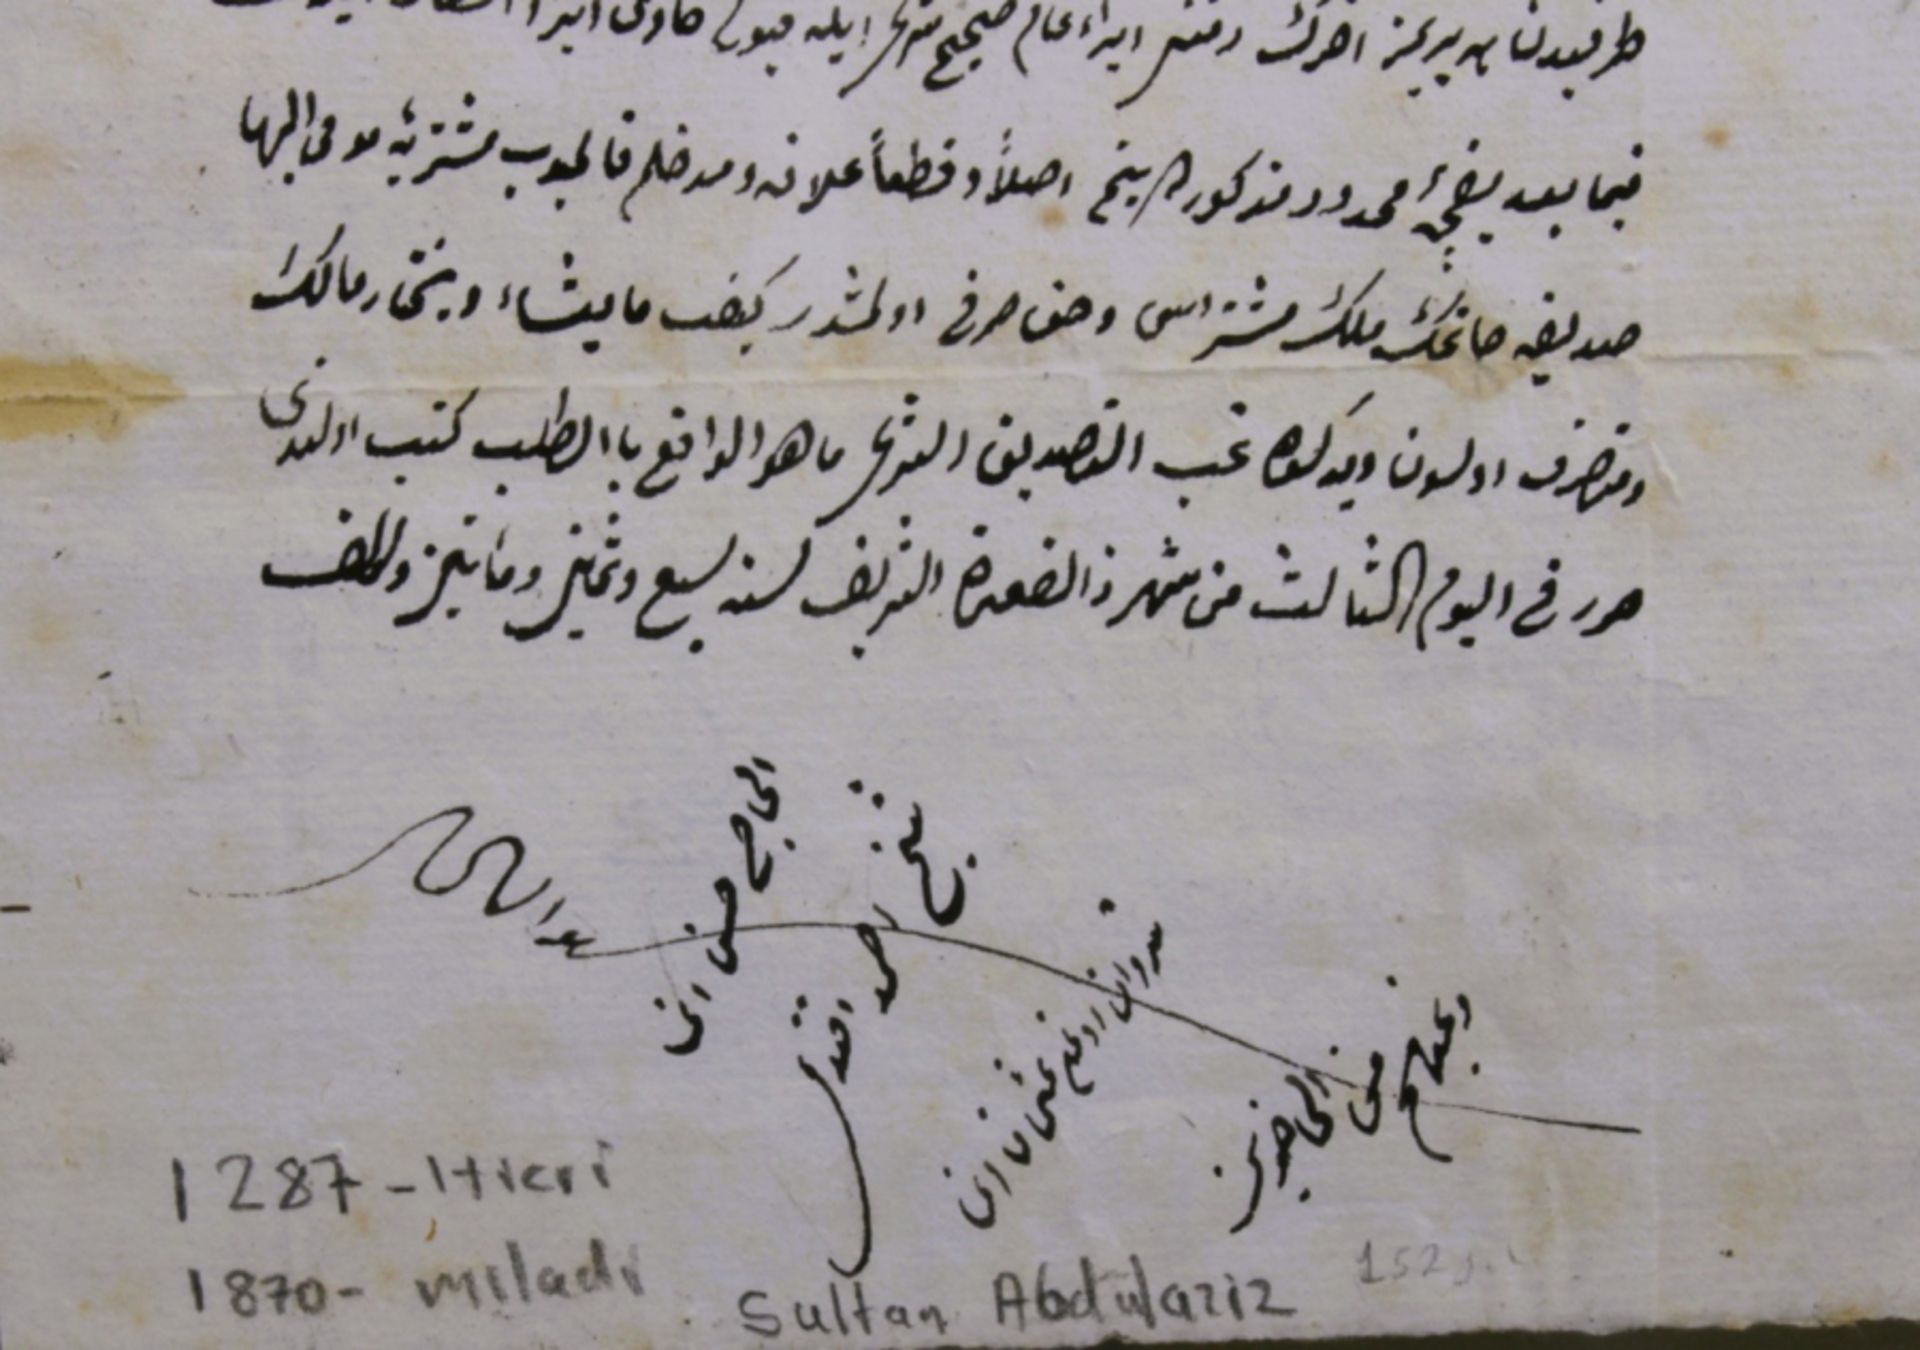 Ottoman empire Sultan Ahmed III period document - Image 6 of 7